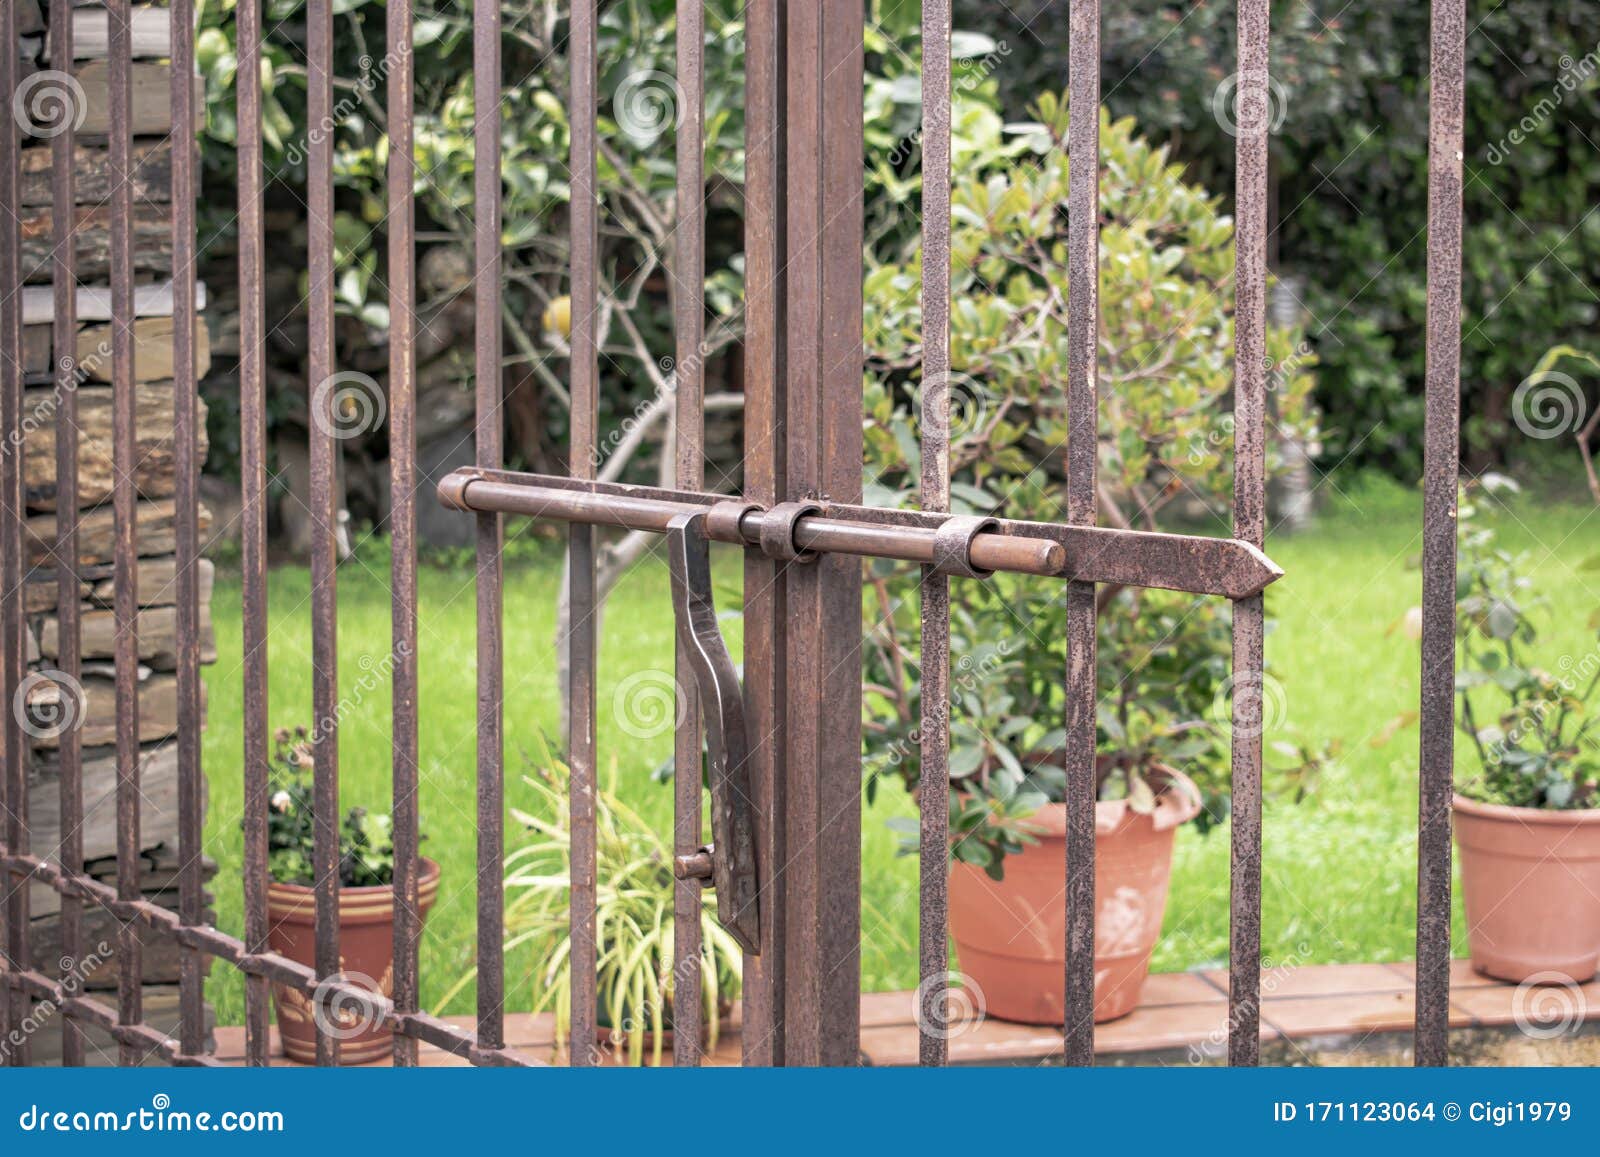 Metal Gate With Sliding Bar To Block Access To A Garden Stock Photo Image Of Architecture Cage